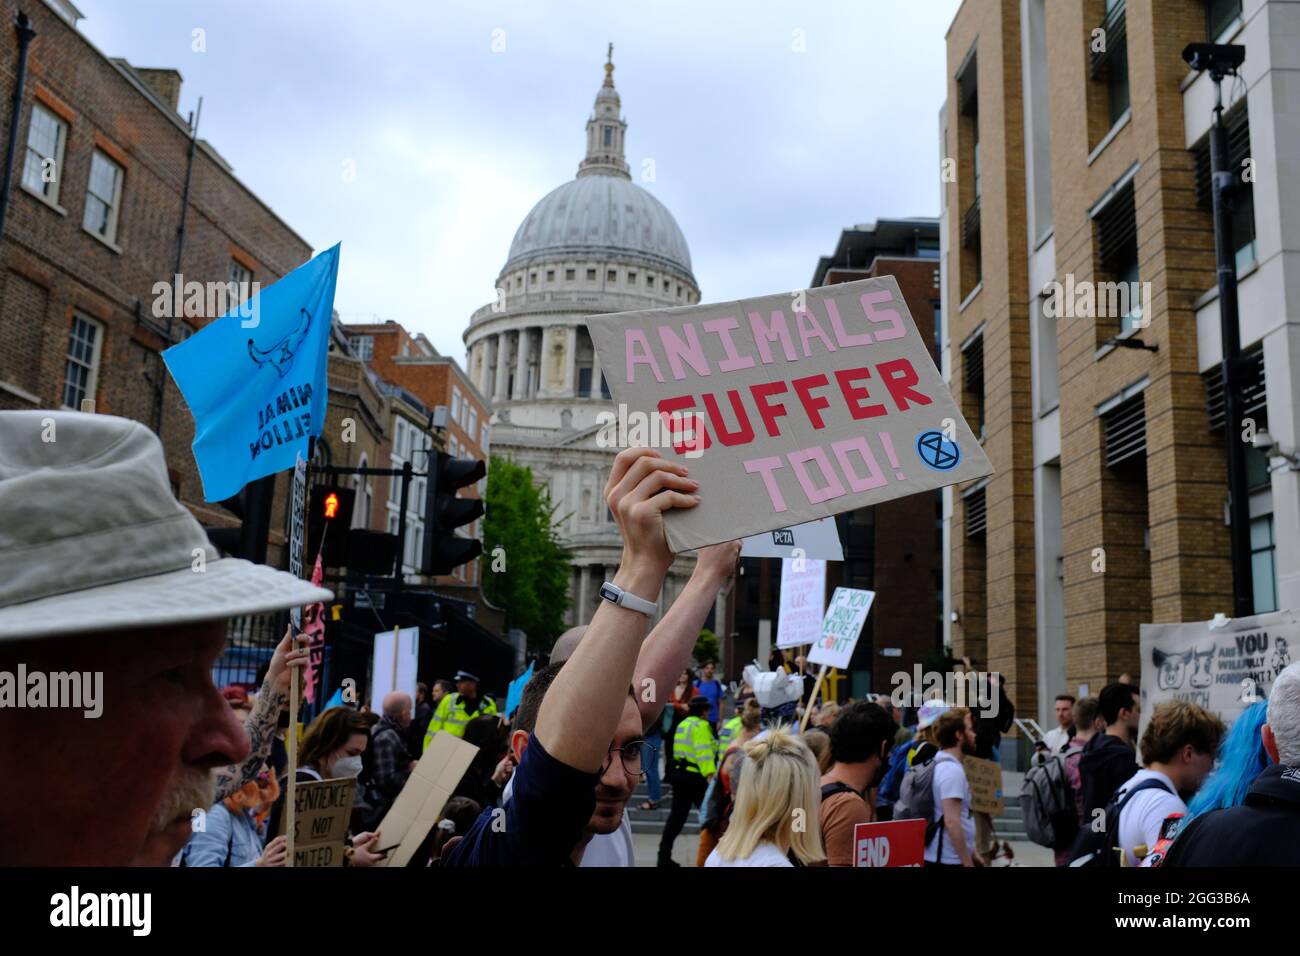 LONDON - 28TH AUGUST 2021: Animal Rebellion protesters on the National Animal Rights March in London. Stock Photo